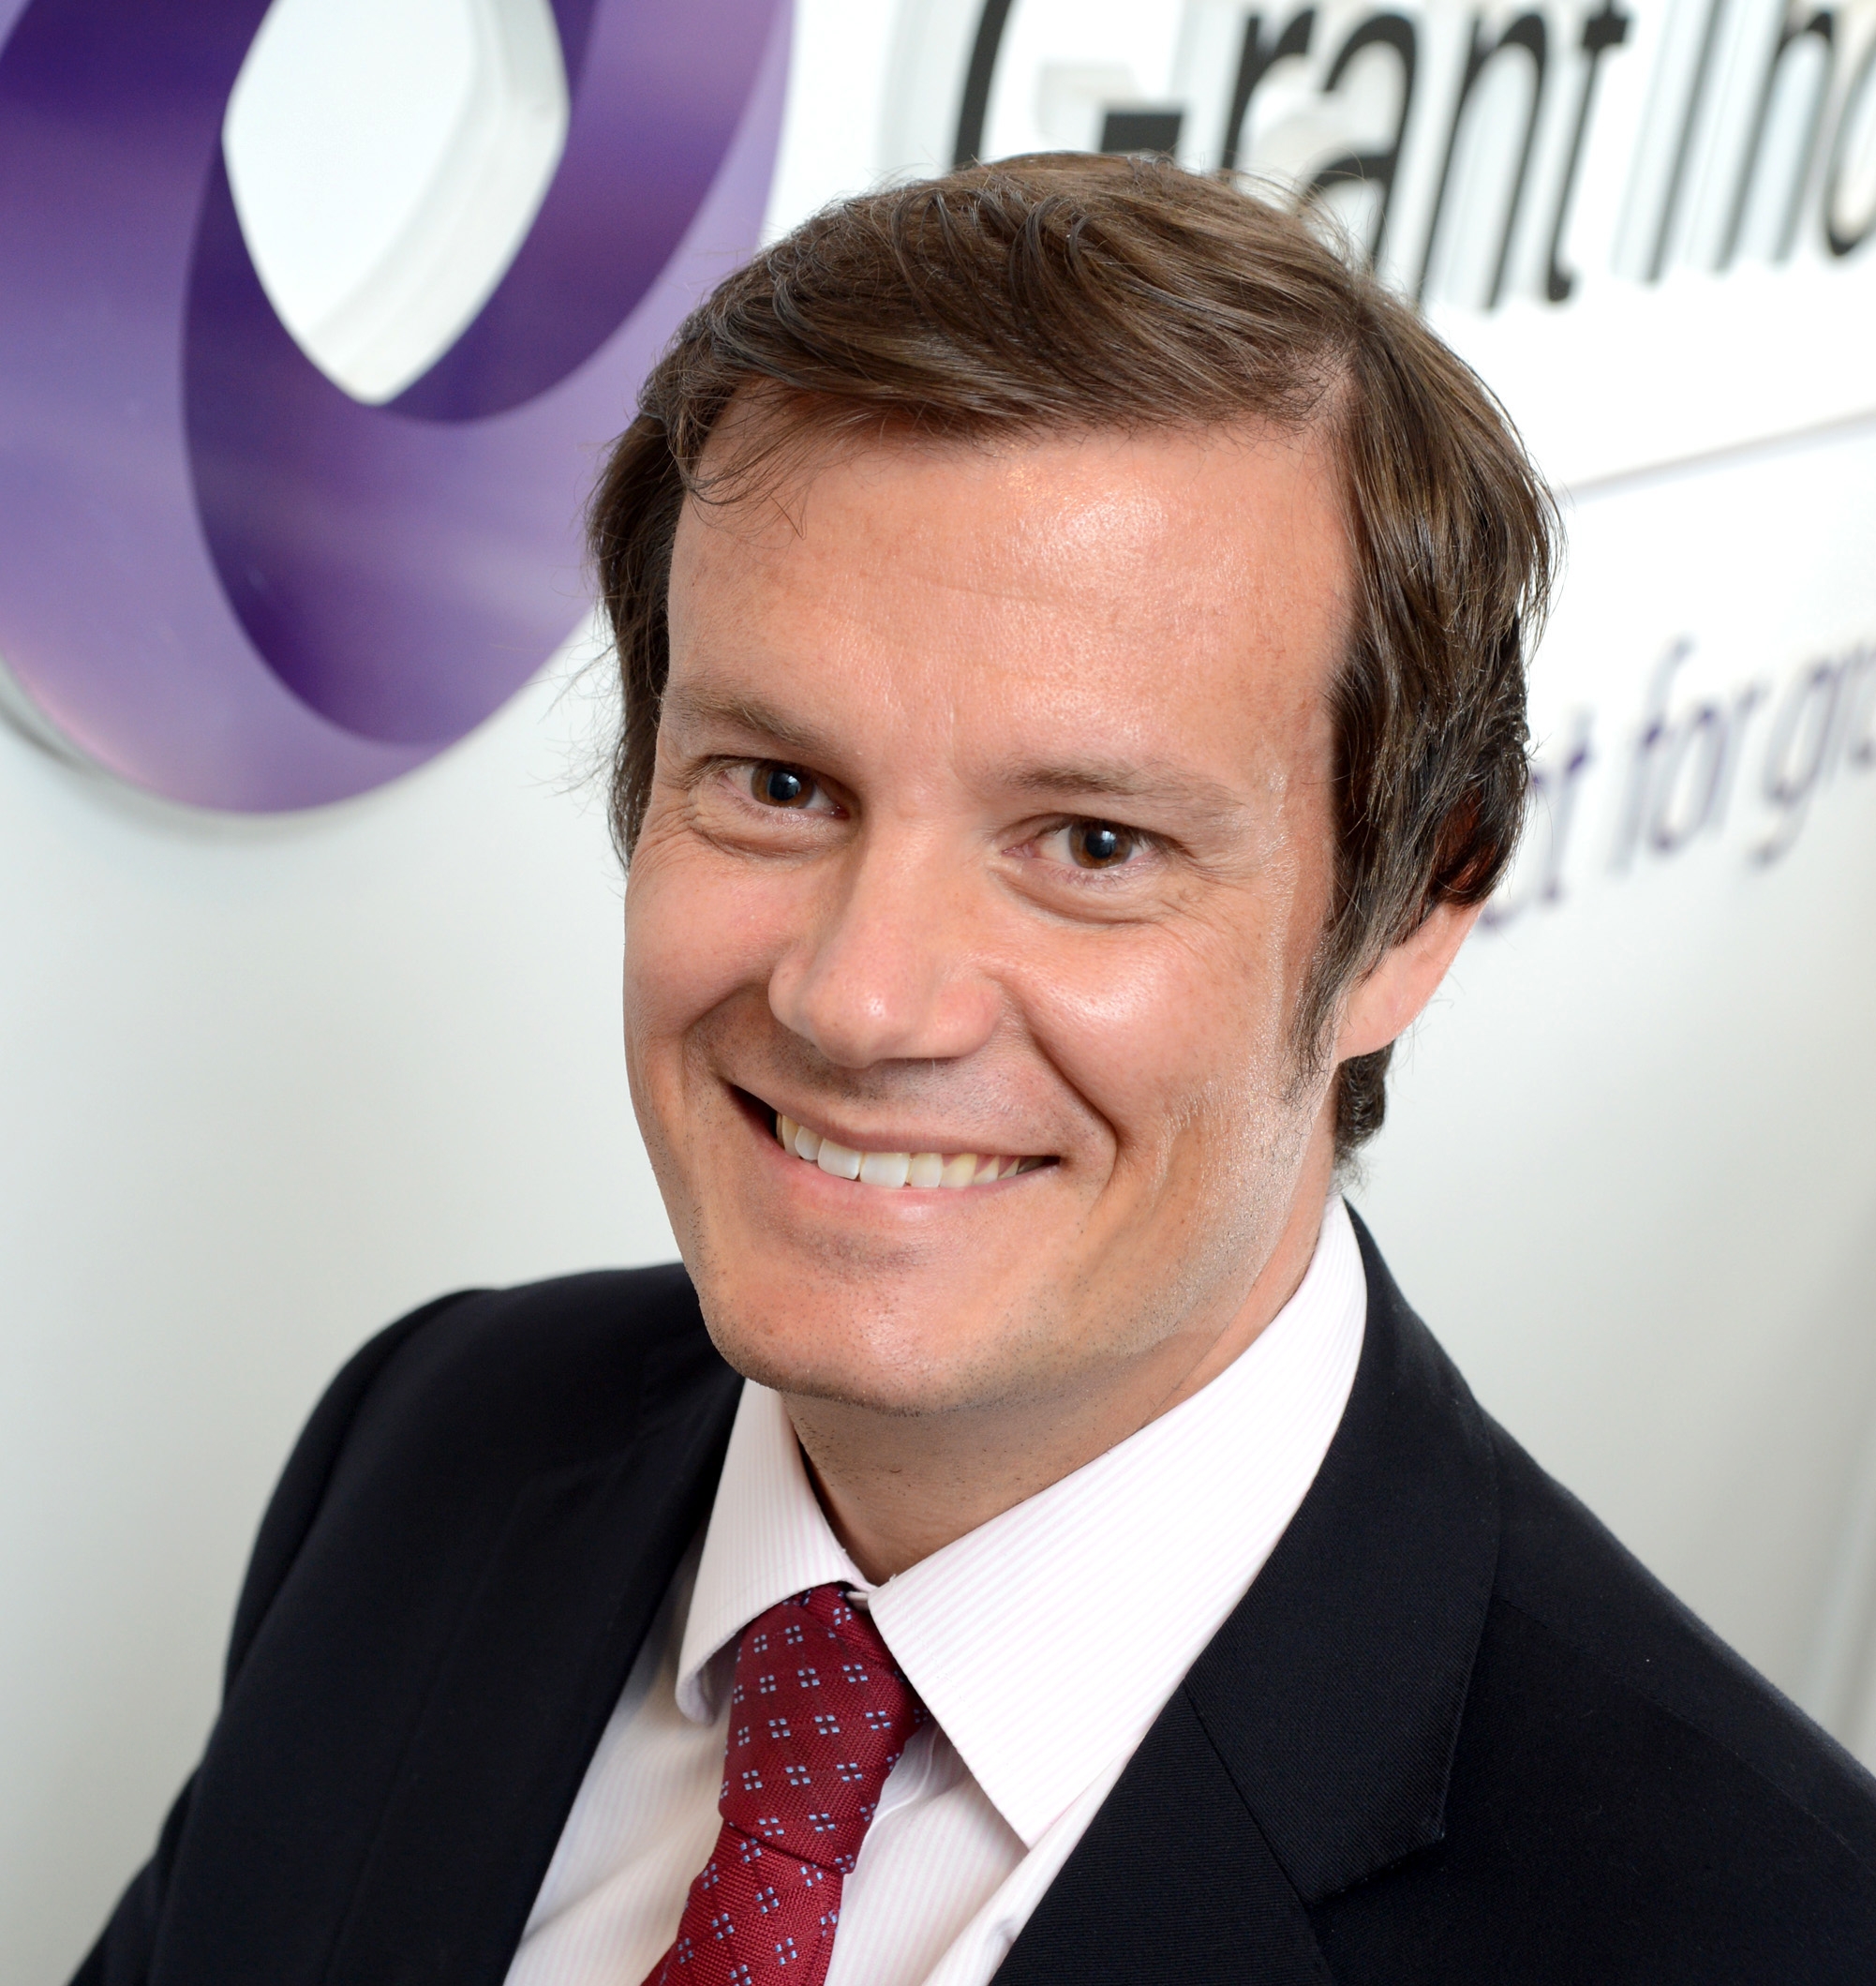 local-businesses-urged-to-contribute-to-grant-thornton-s-manifesto-for-hertfordshire-s-future